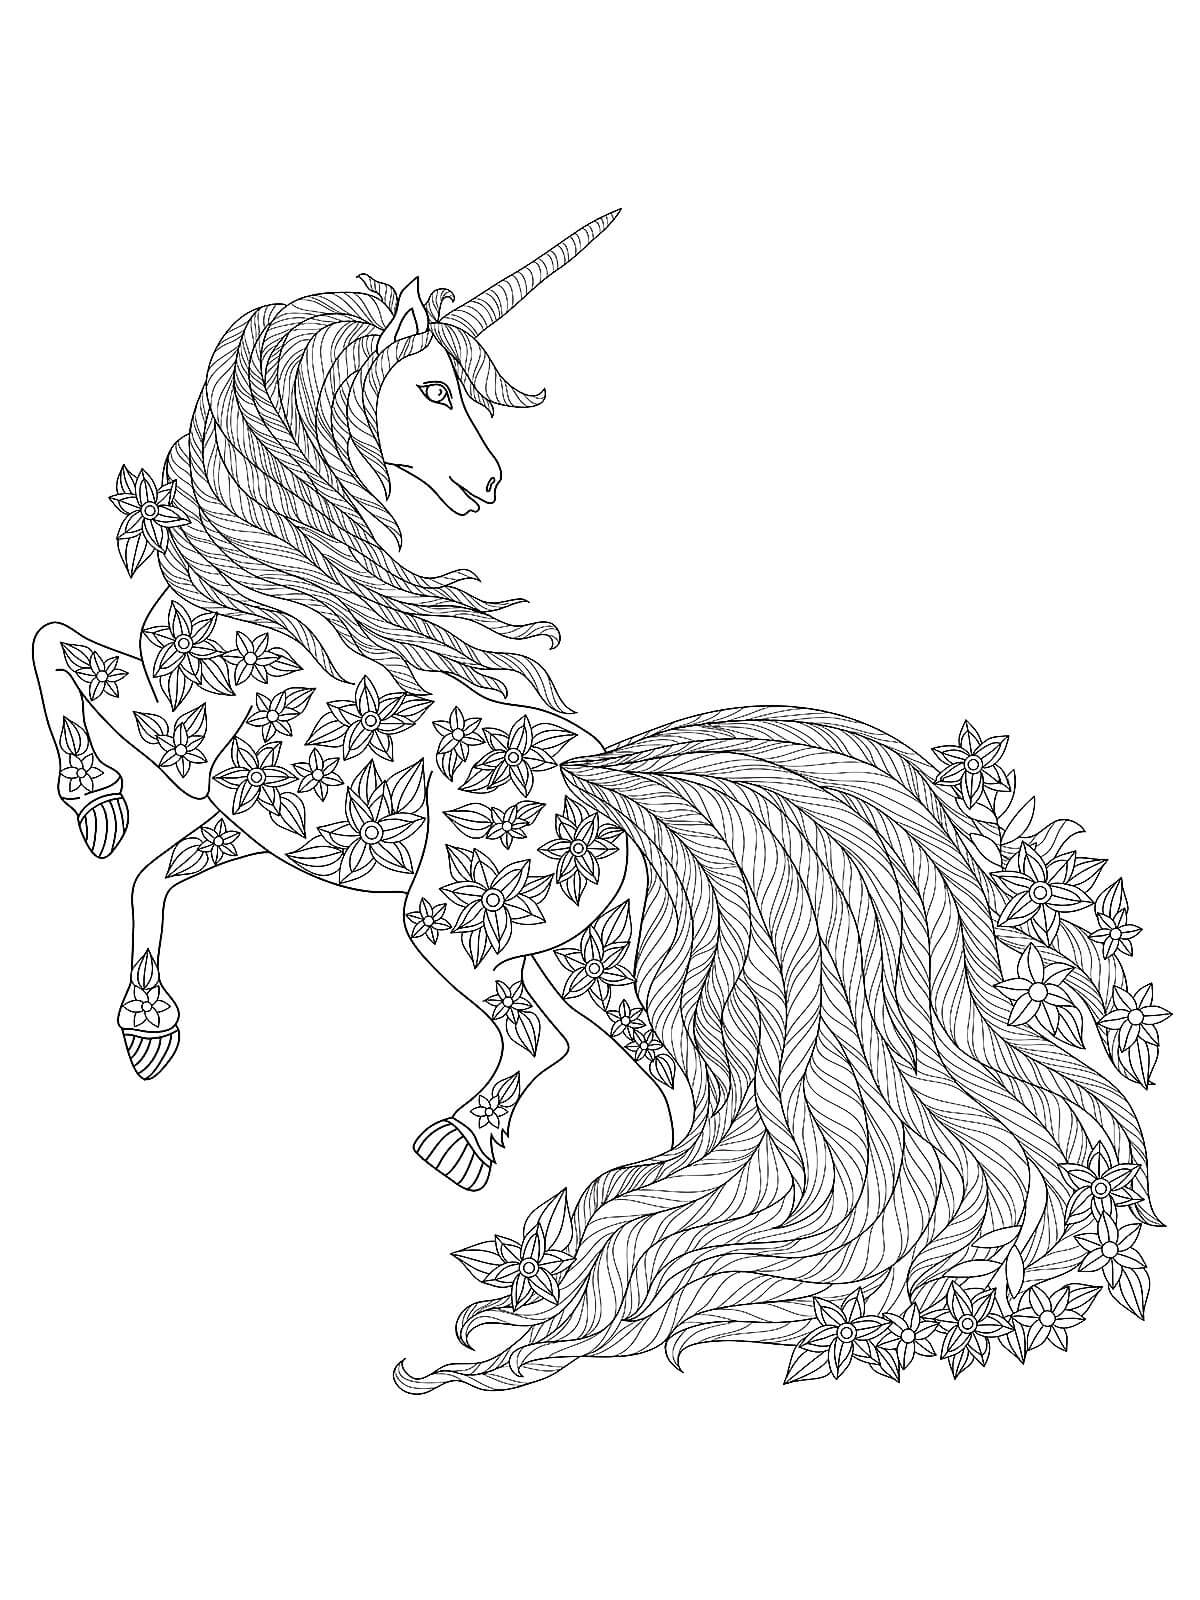 Unicorn made by flower-to-leaf